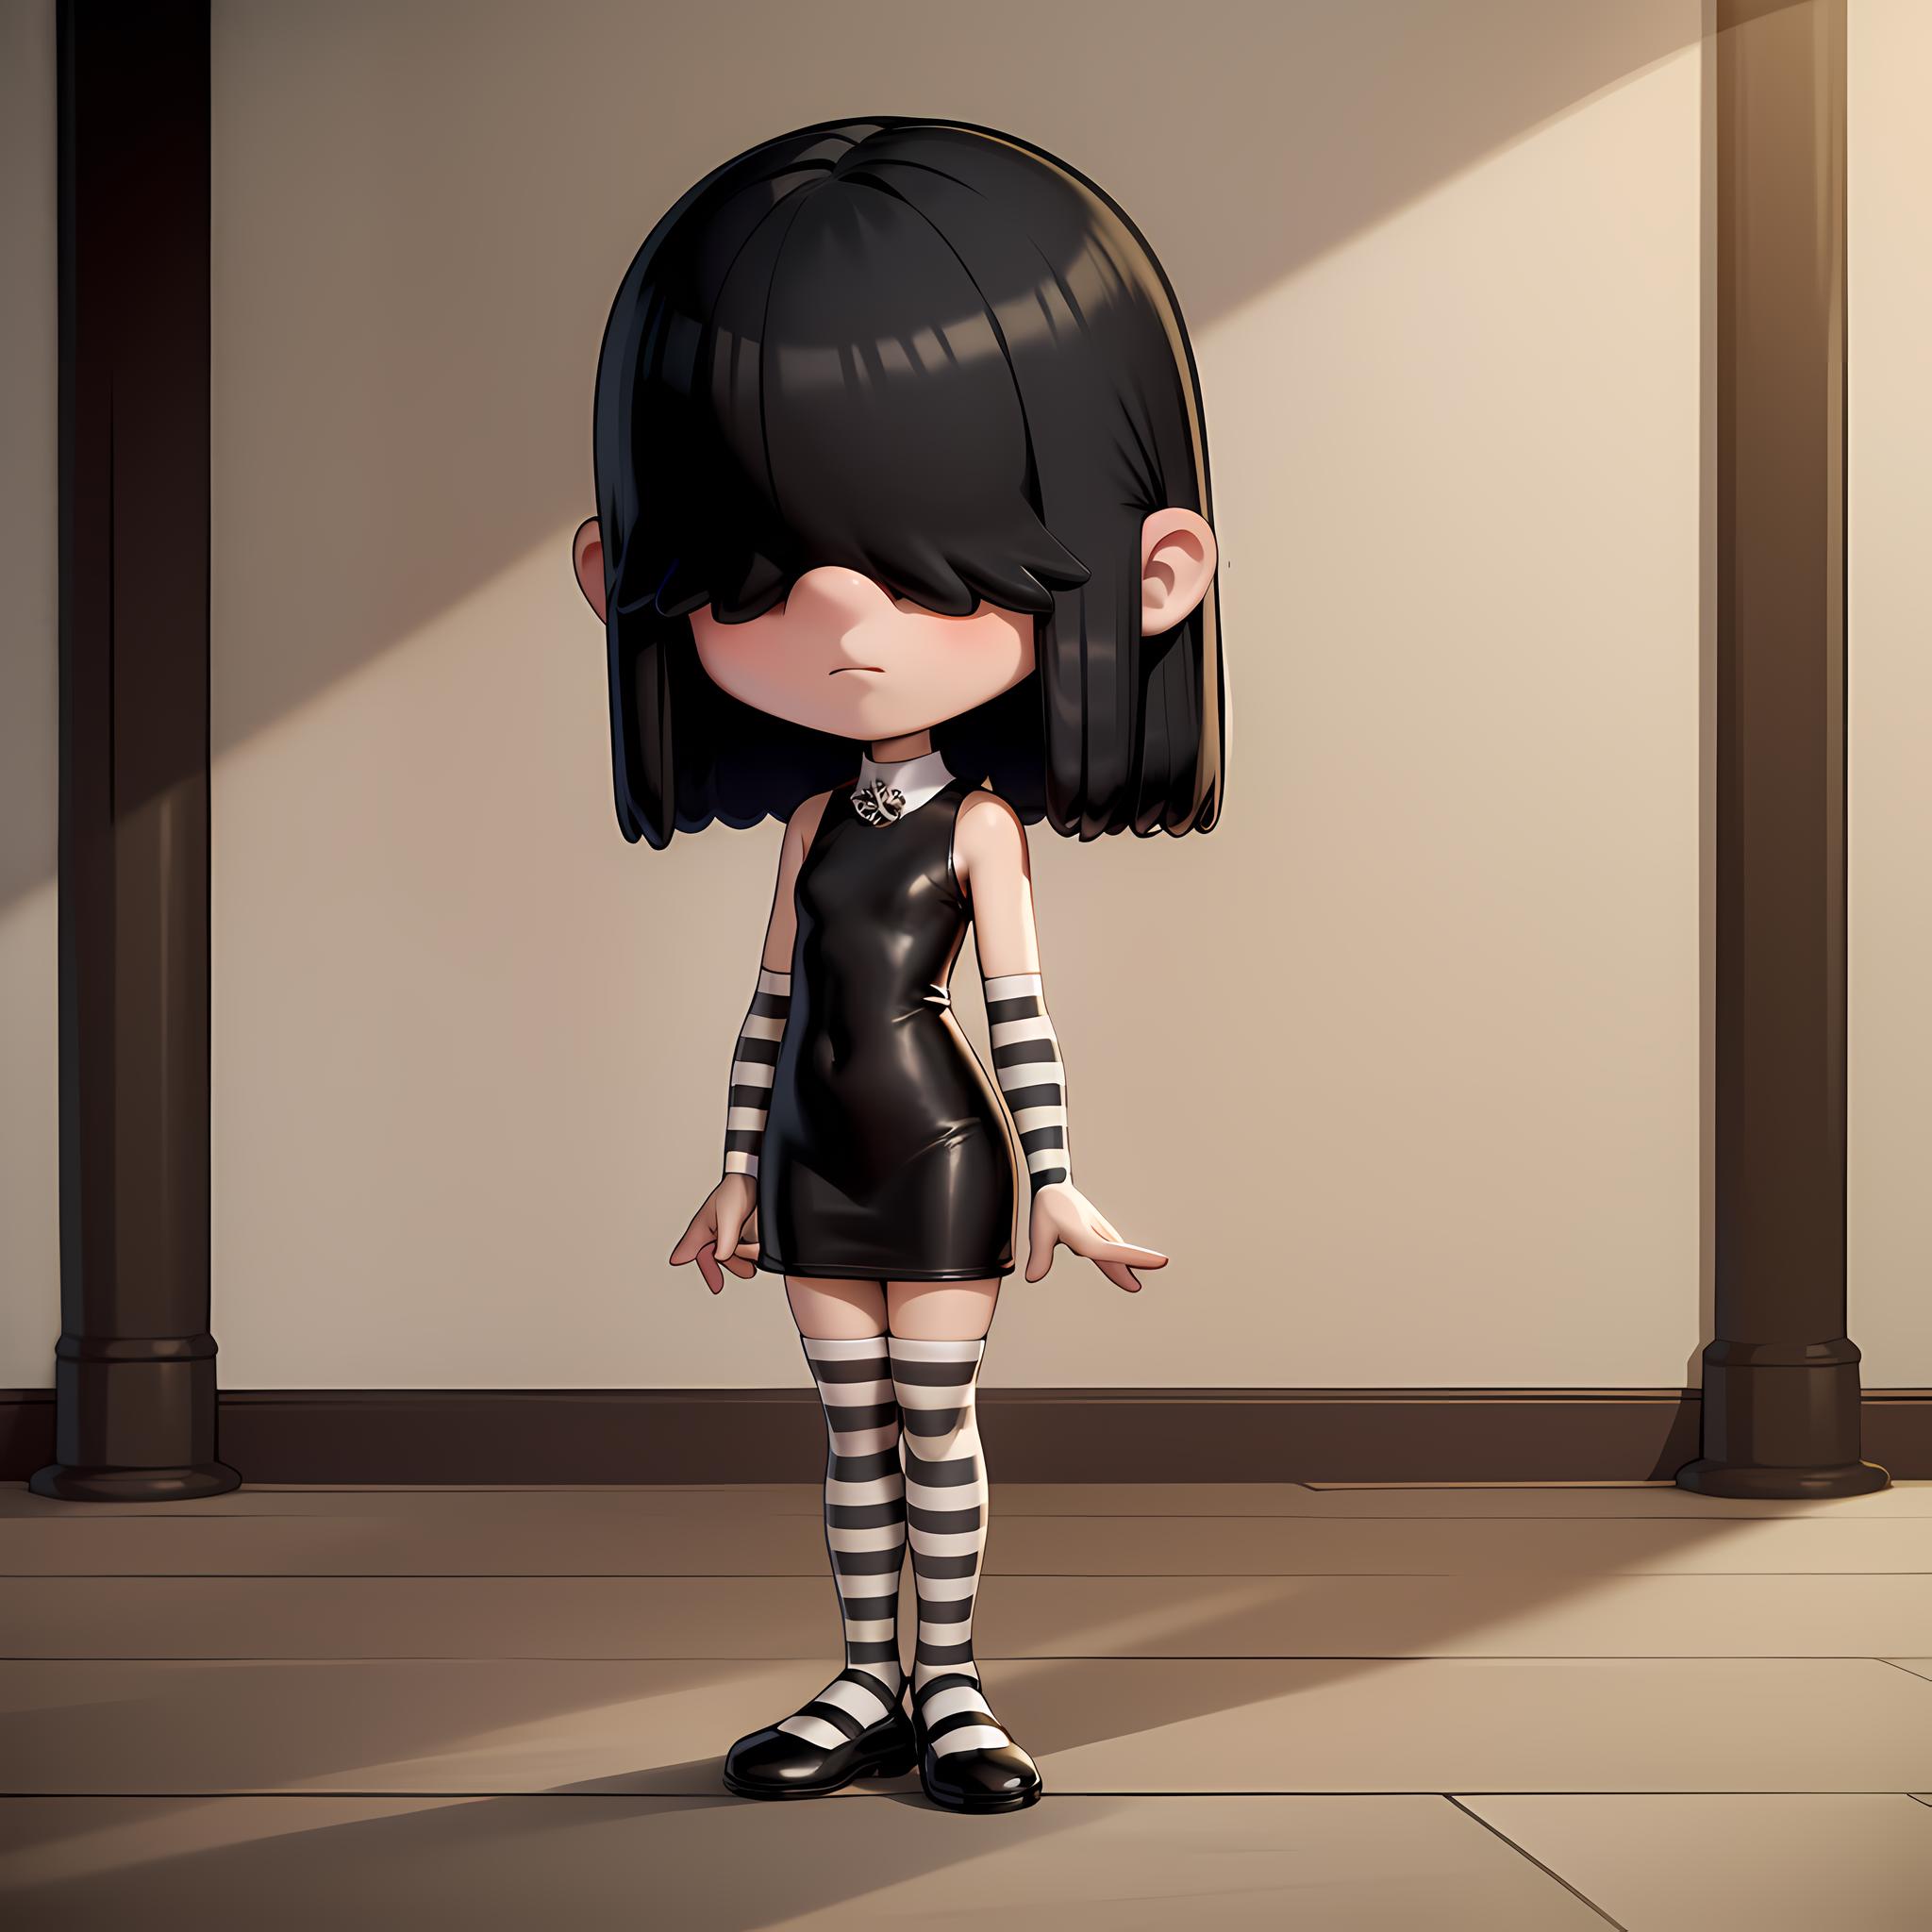 Lucy loud [loud house] image by TheGooder